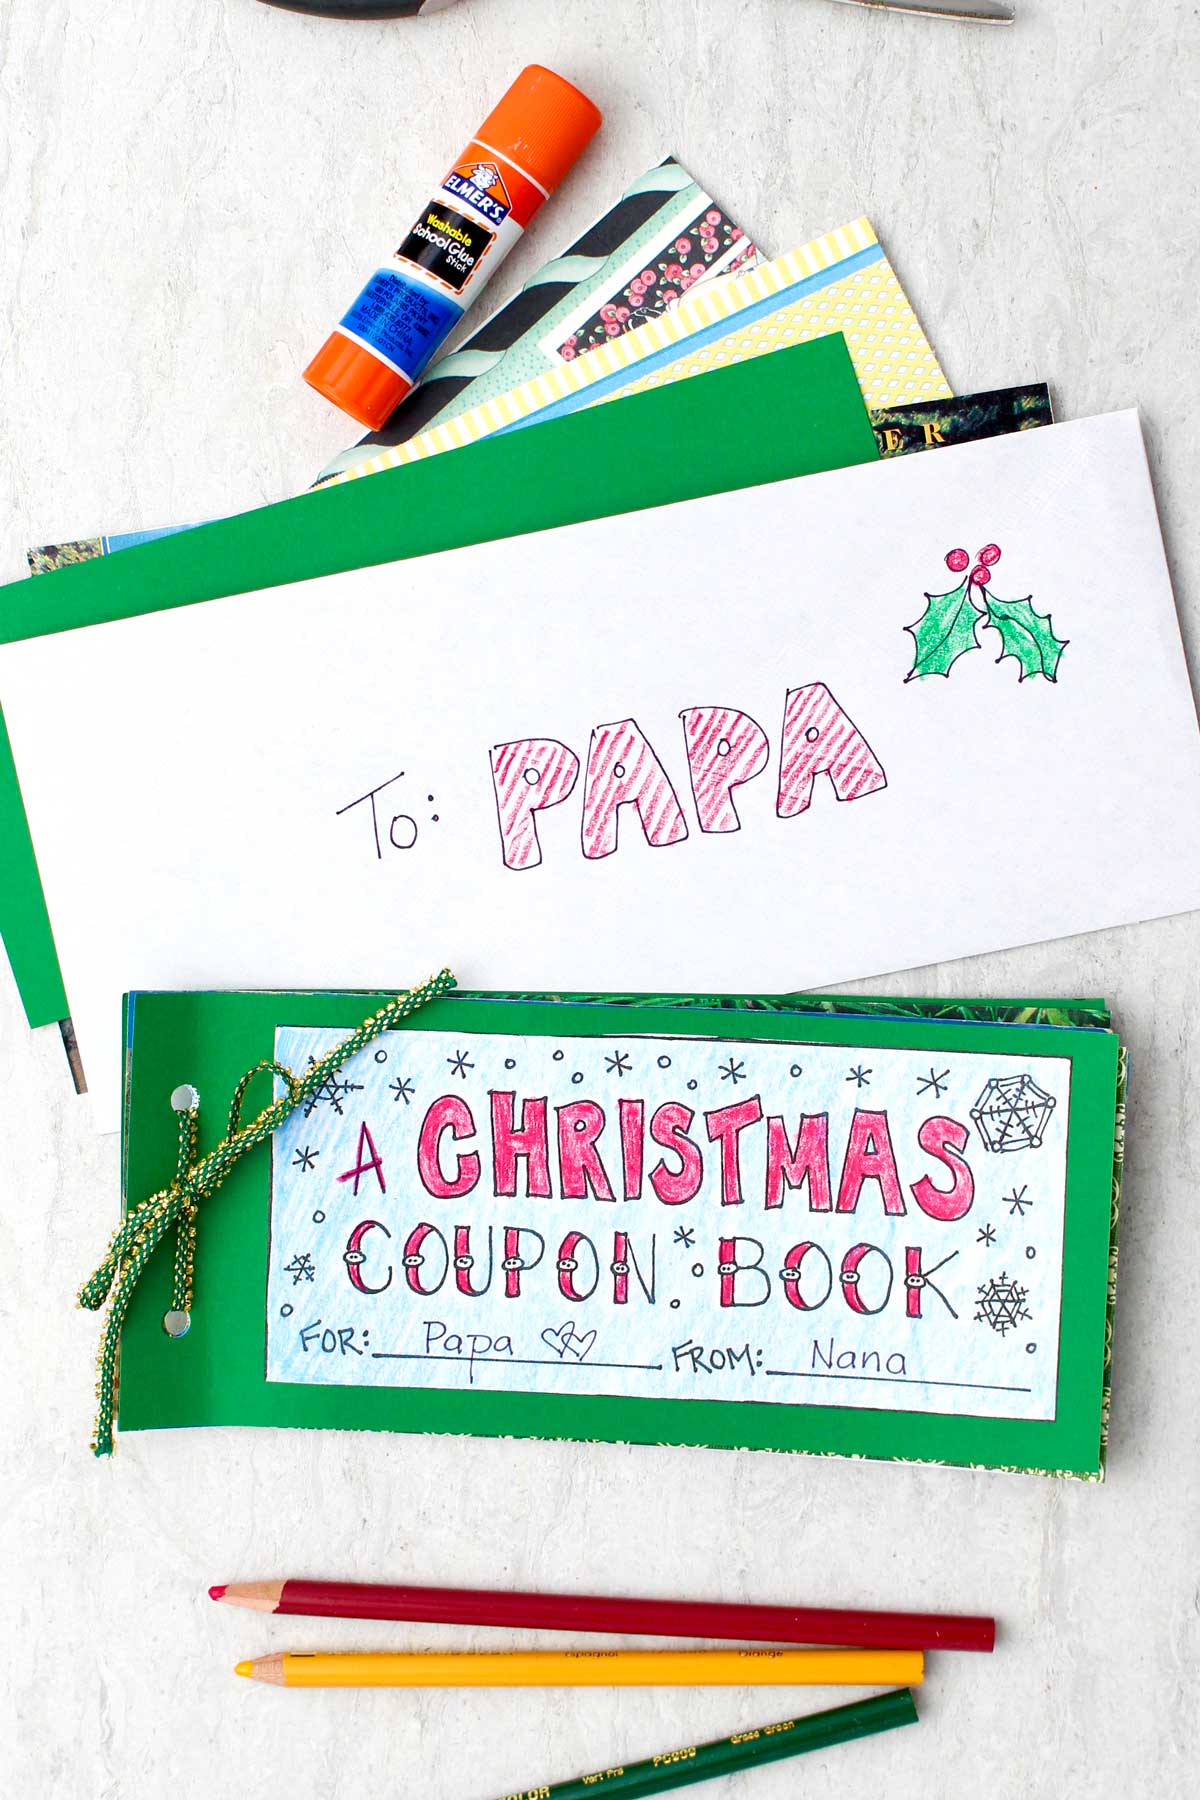 A final DIY Christmas Coupon Book sitting near an envelope addressed to "papa", with colored pencils nearby.